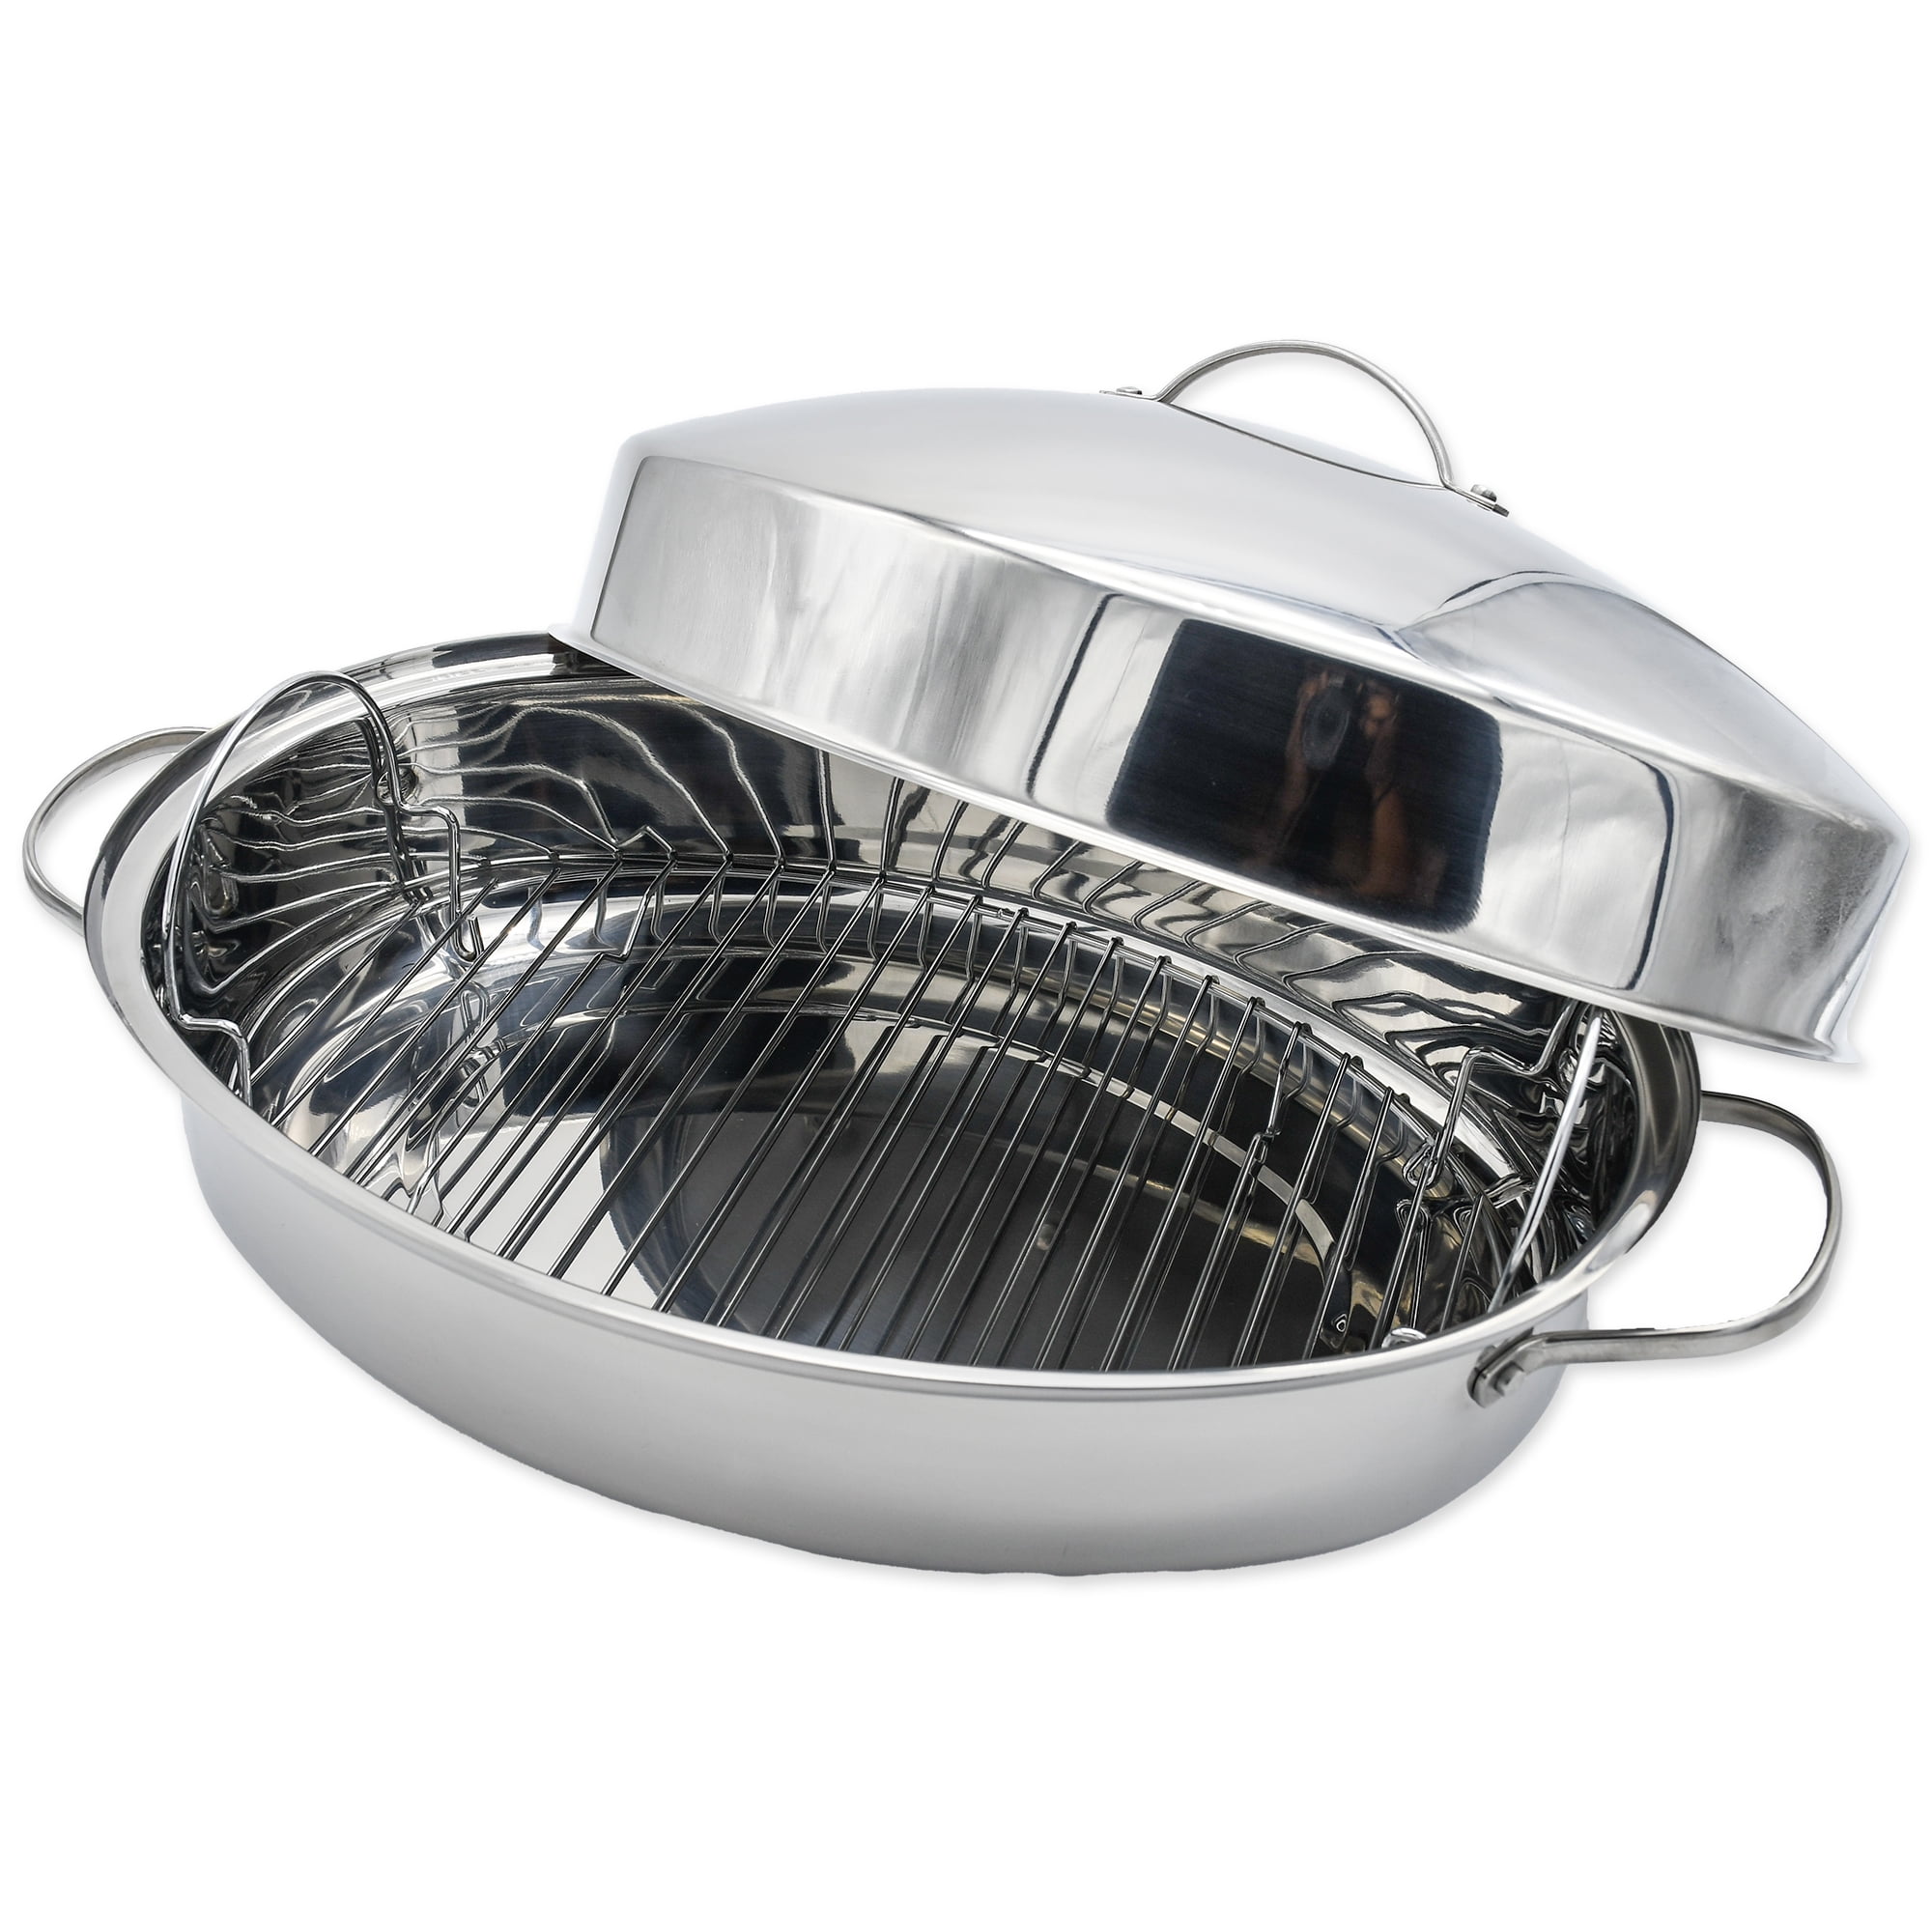 Stainless Steel Chicken Fish Meat Roasting Tray Pan Set Lid Oval Cooking Baking 